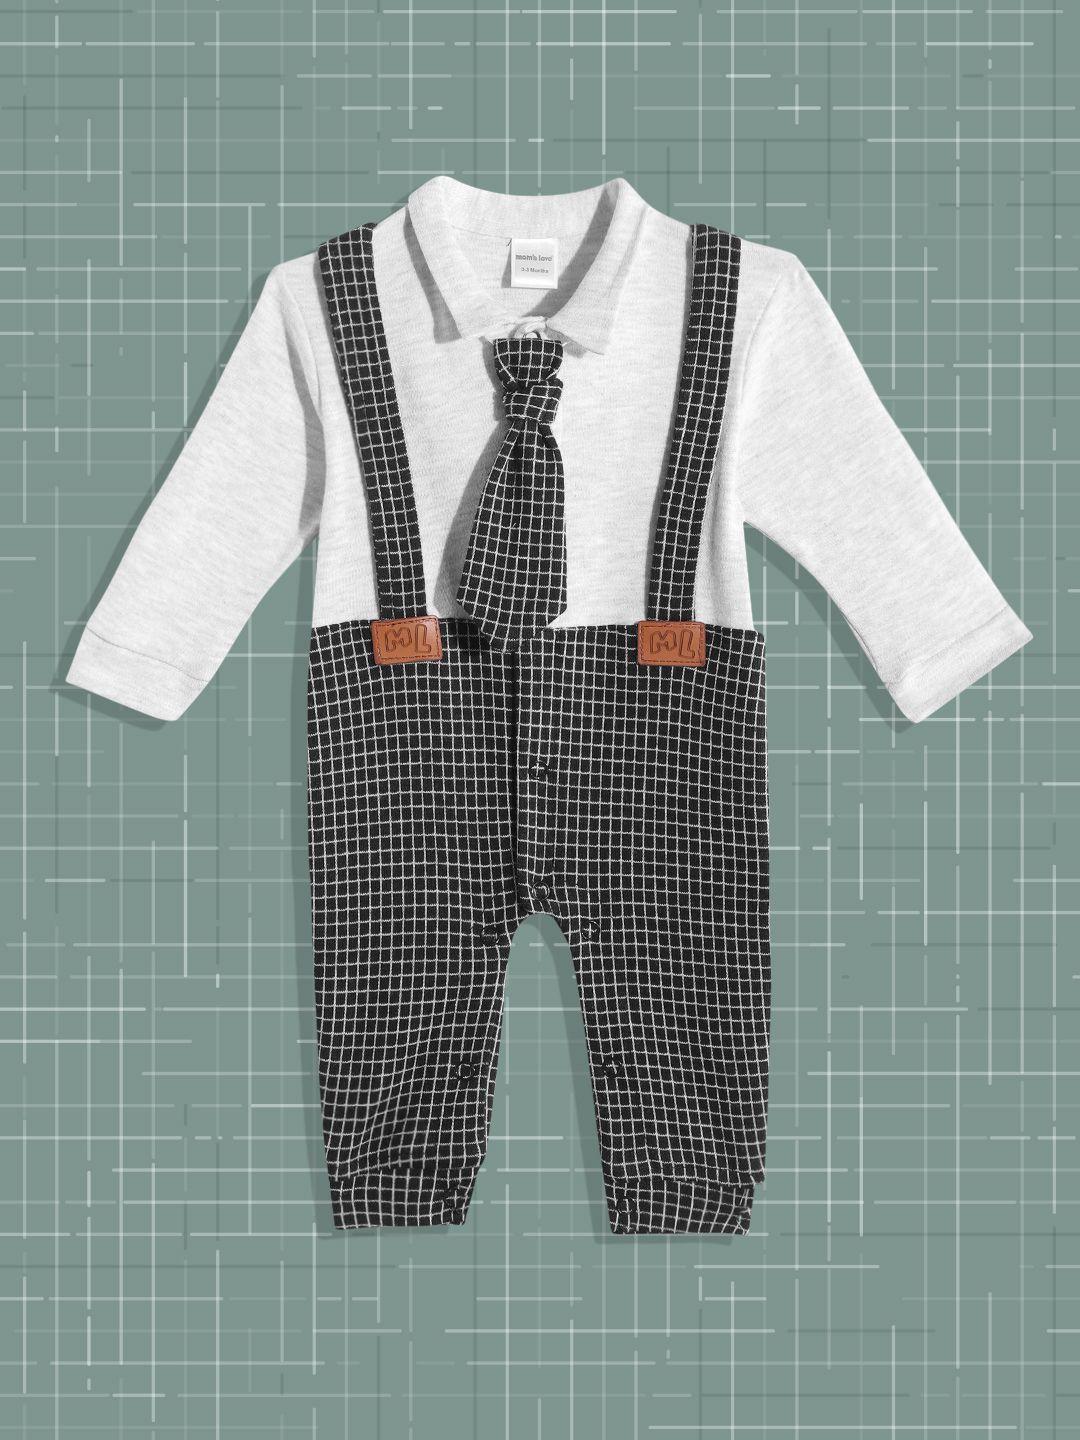 moms love infant boys grey & black cotton checked rompers with attached suspenders & tie